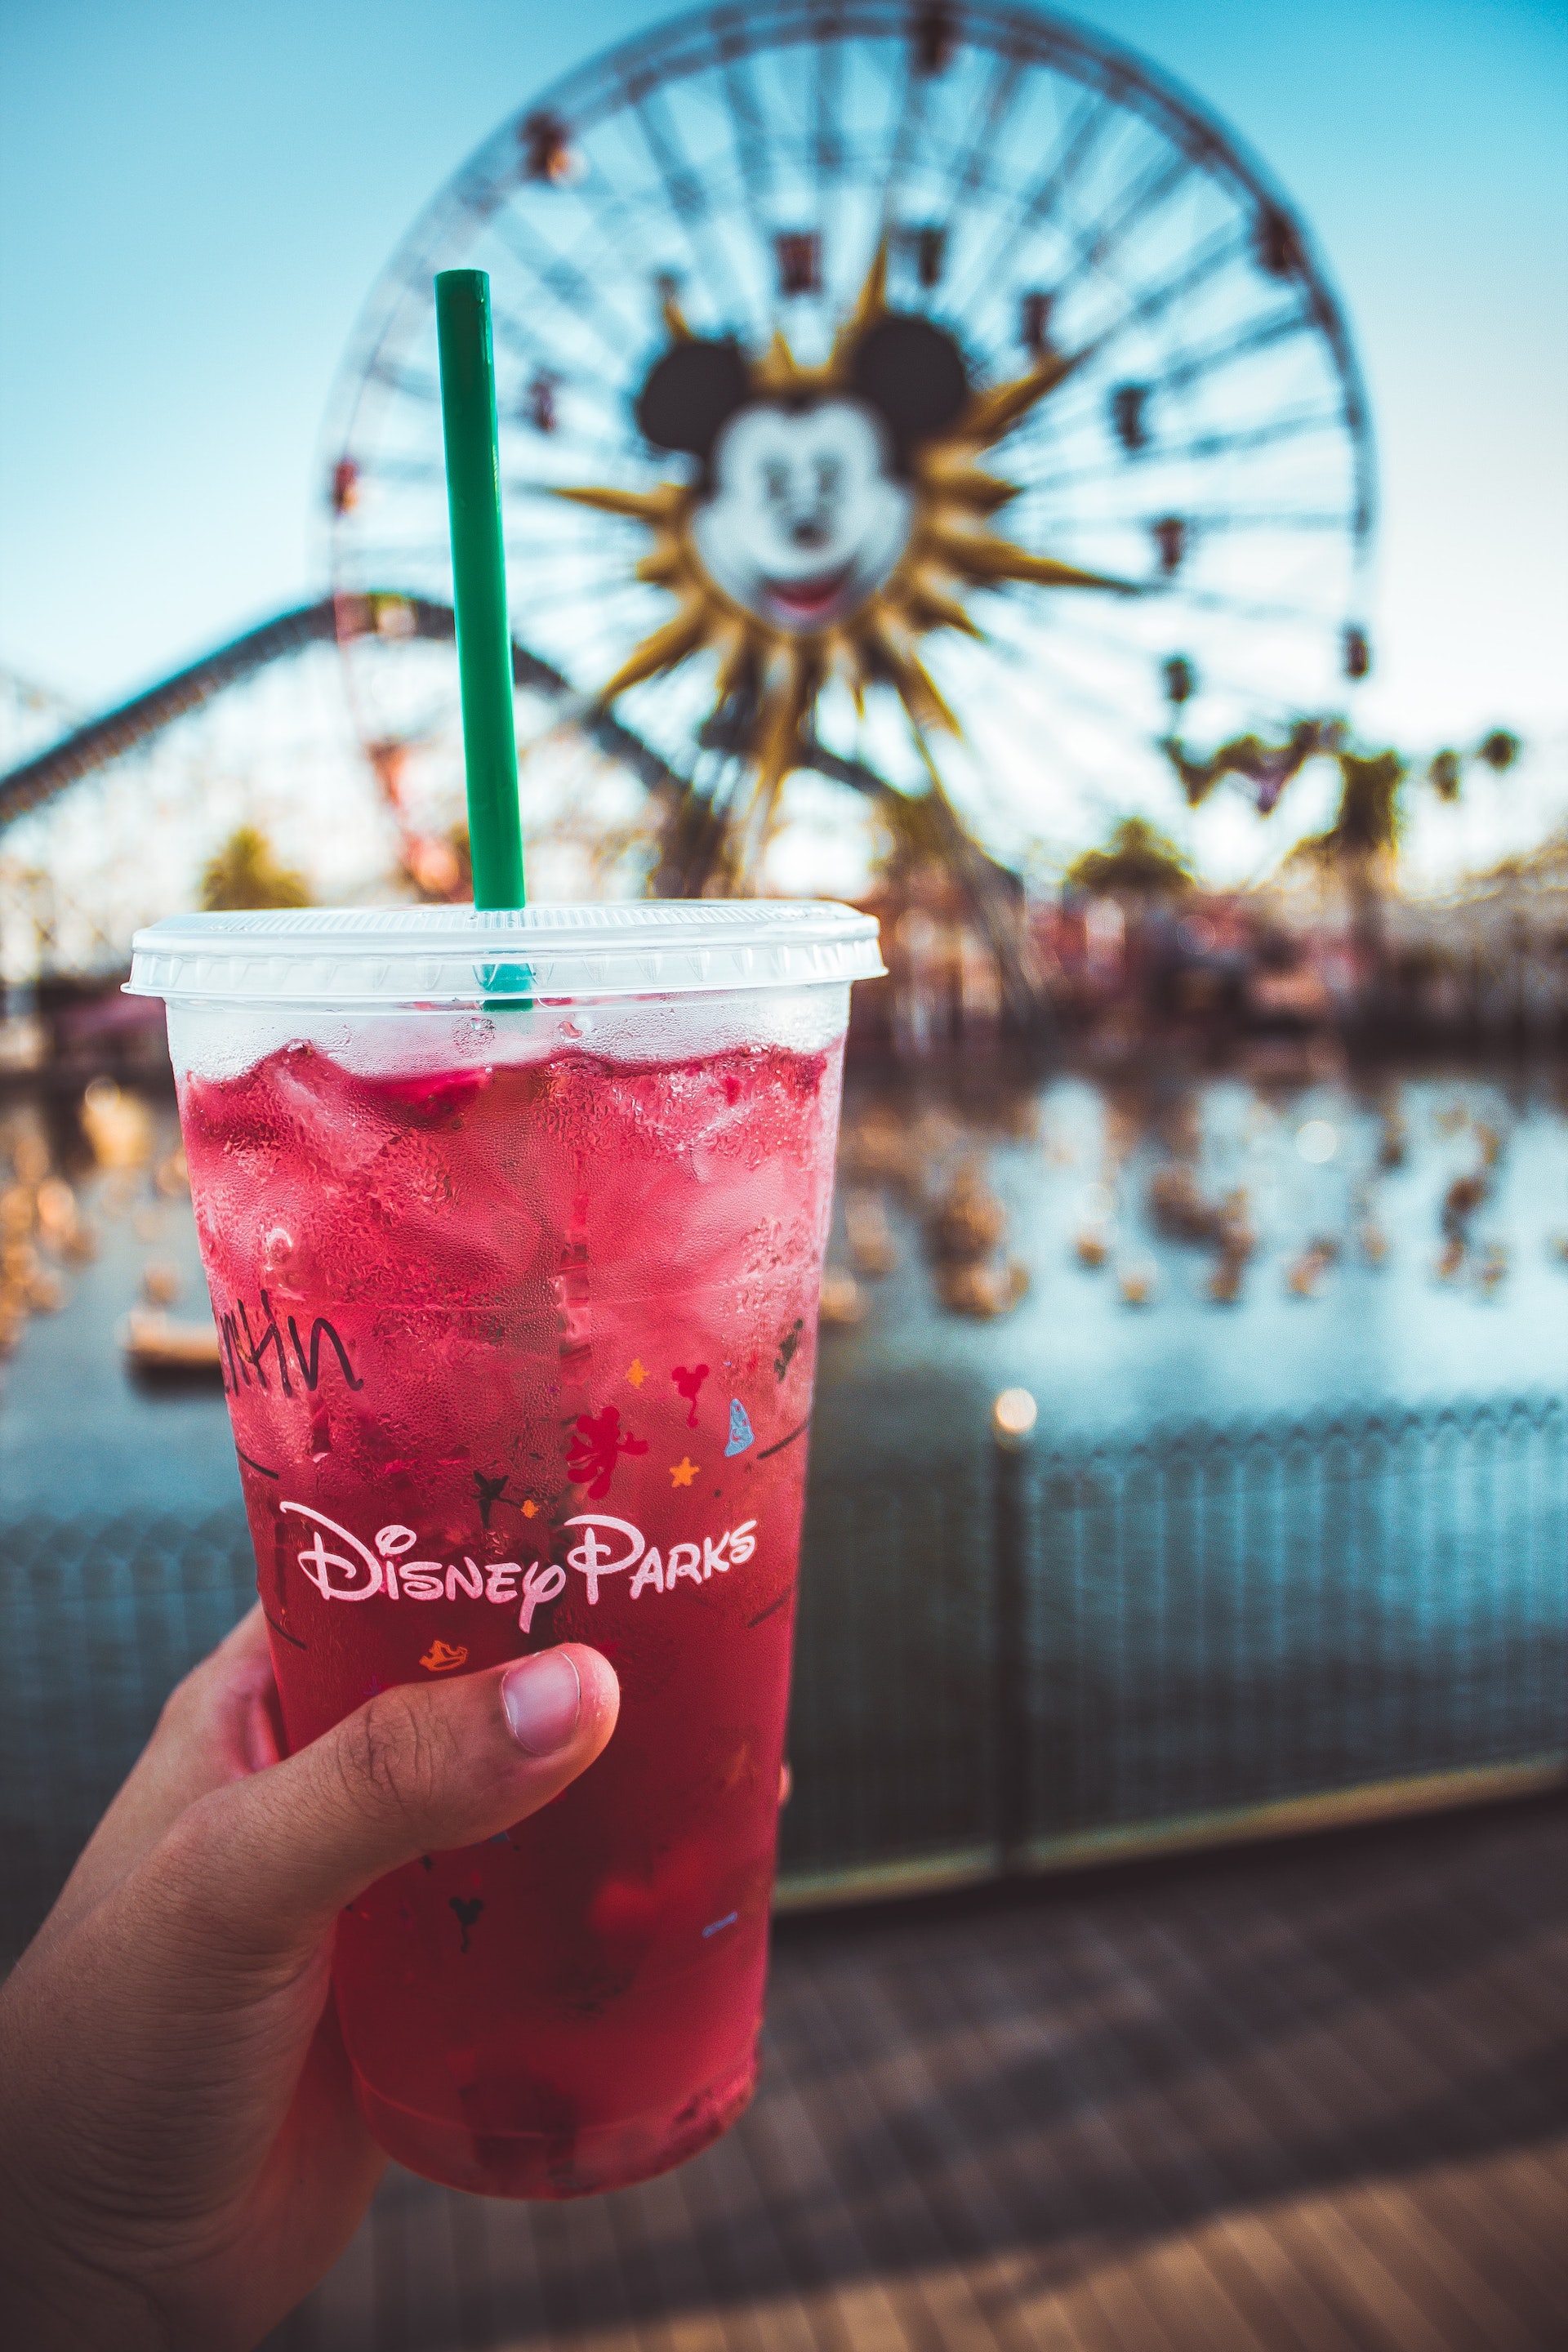 Someone holding up a cold drink in a Disney plastic cup in Disneyland.